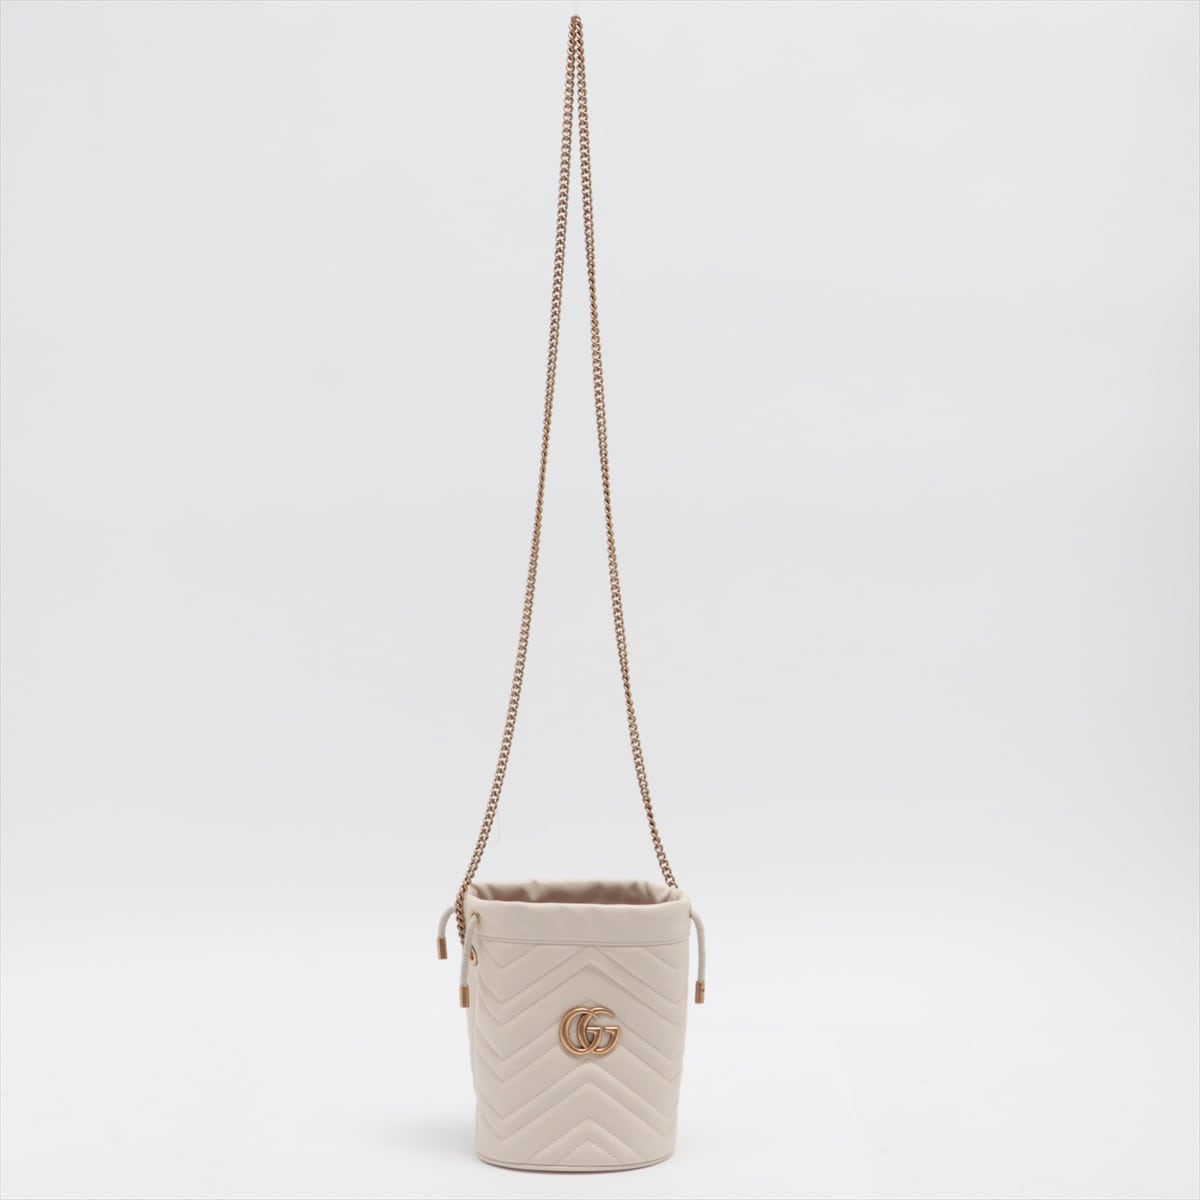 Gucci GG Marmont Leather Shoulder bag White 575163